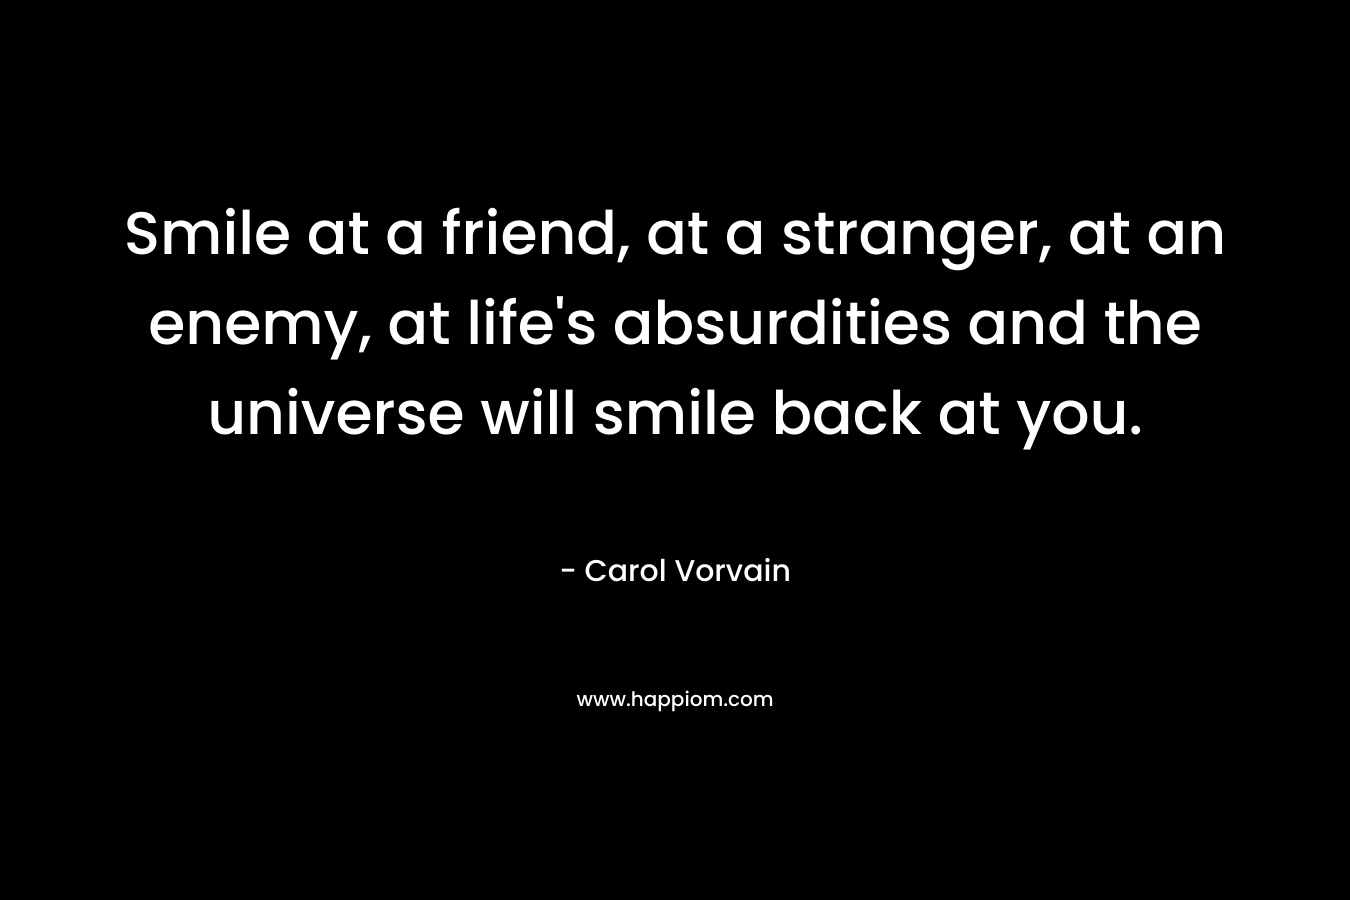 Smile at a friend, at a stranger, at an enemy, at life’s absurdities and the universe will smile back at you. – Carol Vorvain